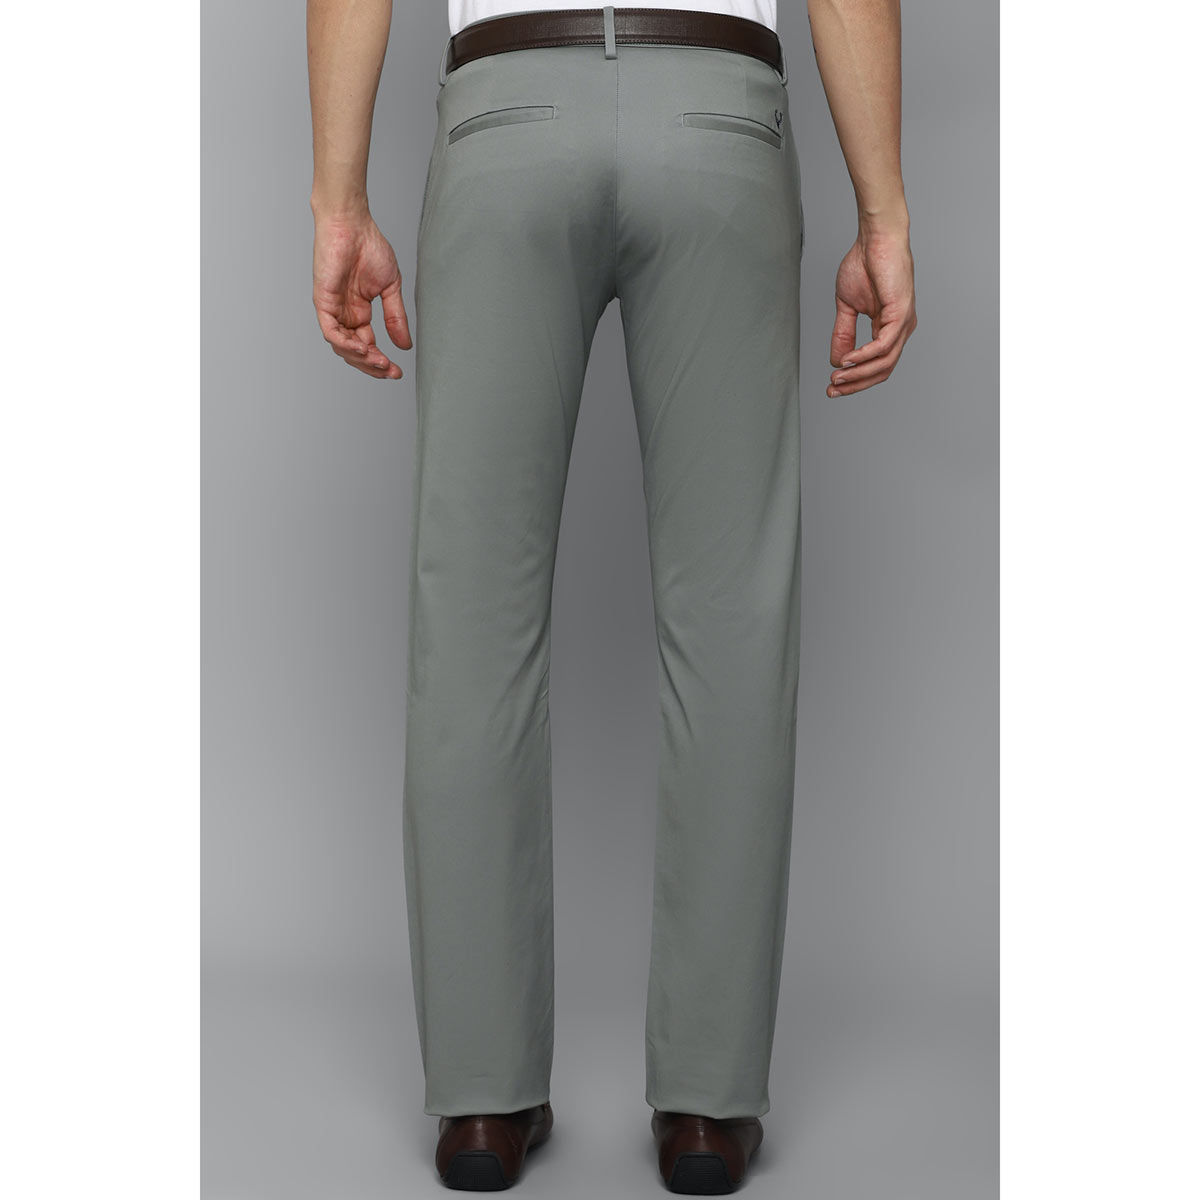 Allen Solly Grey Trousers: Buy Allen Solly Grey Trousers Online at Best  Price in India | NykaaMan